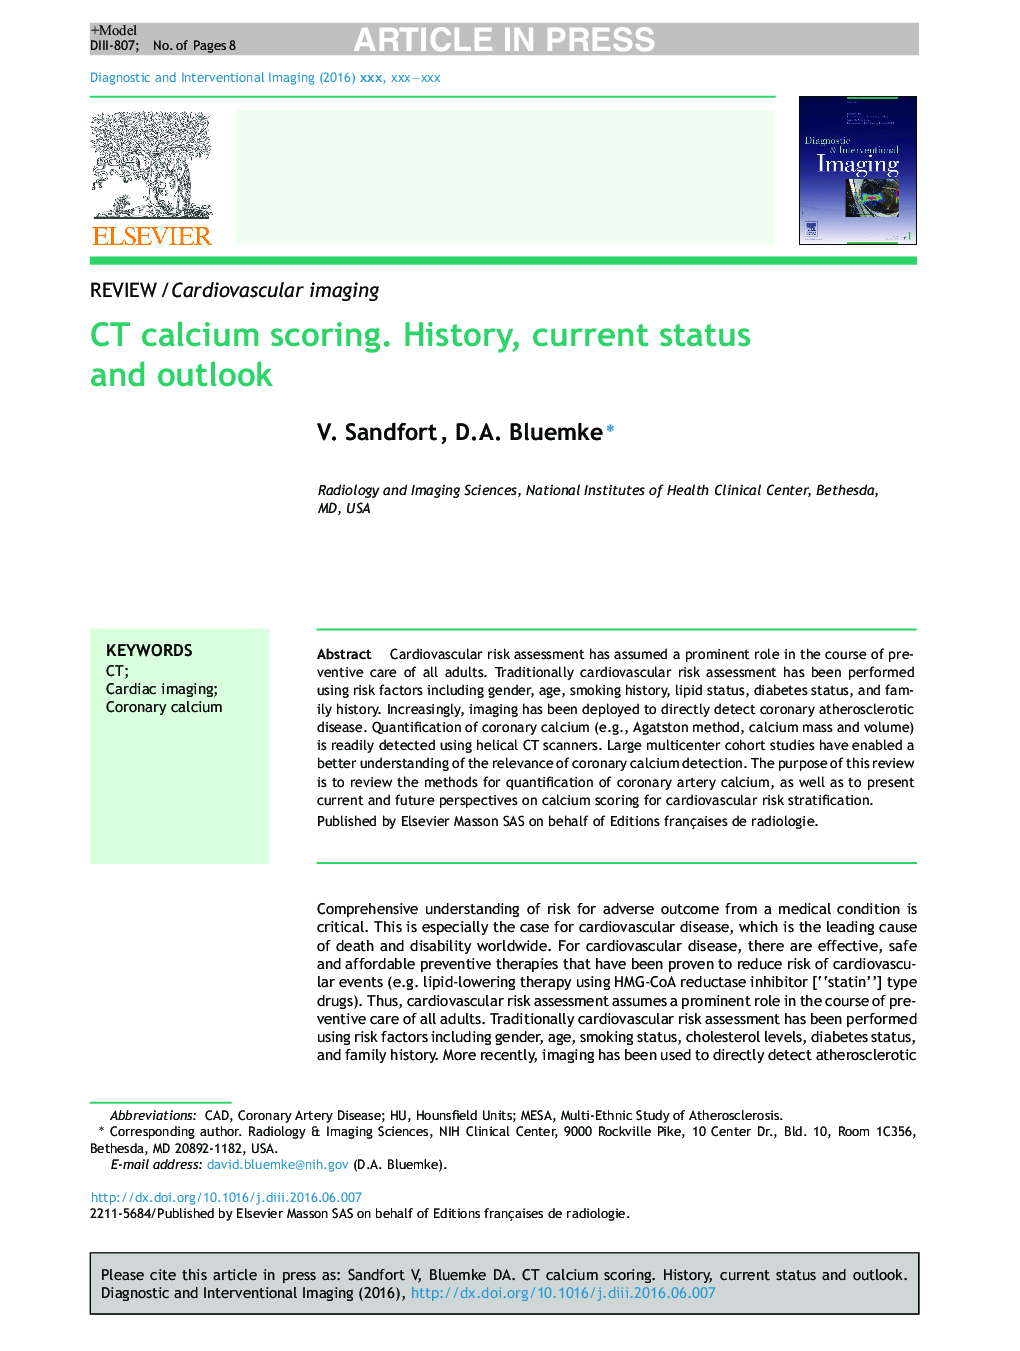 CT calcium scoring. History, current status and outlook